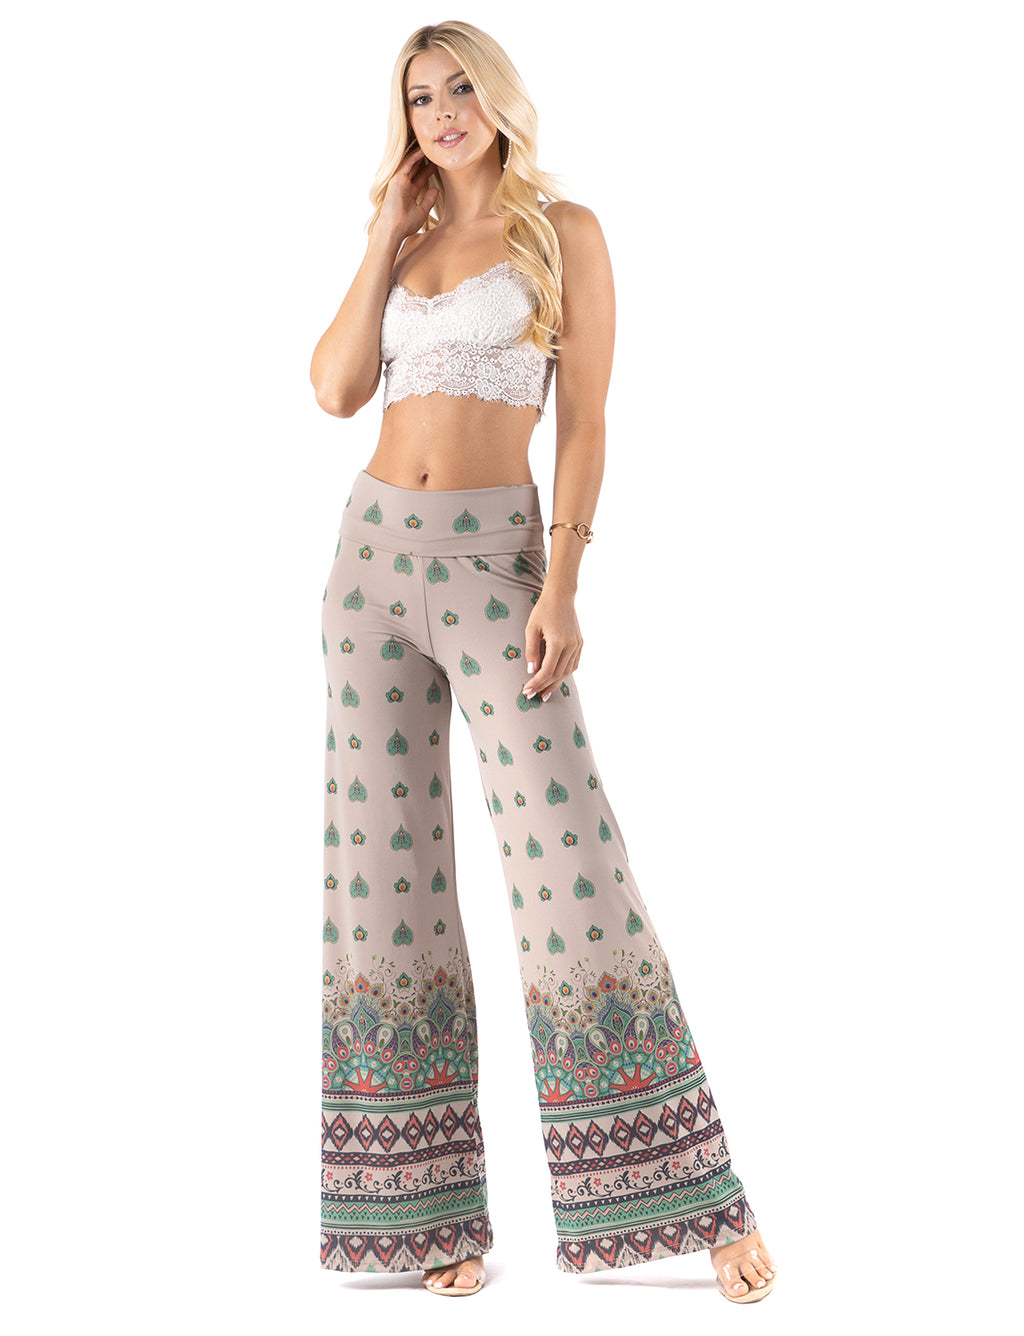 Tan & Green Floral High waist palazzo pants featuring pockets, wide legs, and a comfortable stretchy fabric Perfect during spring, summer,Concerts, Festivals, Dance, Brunch